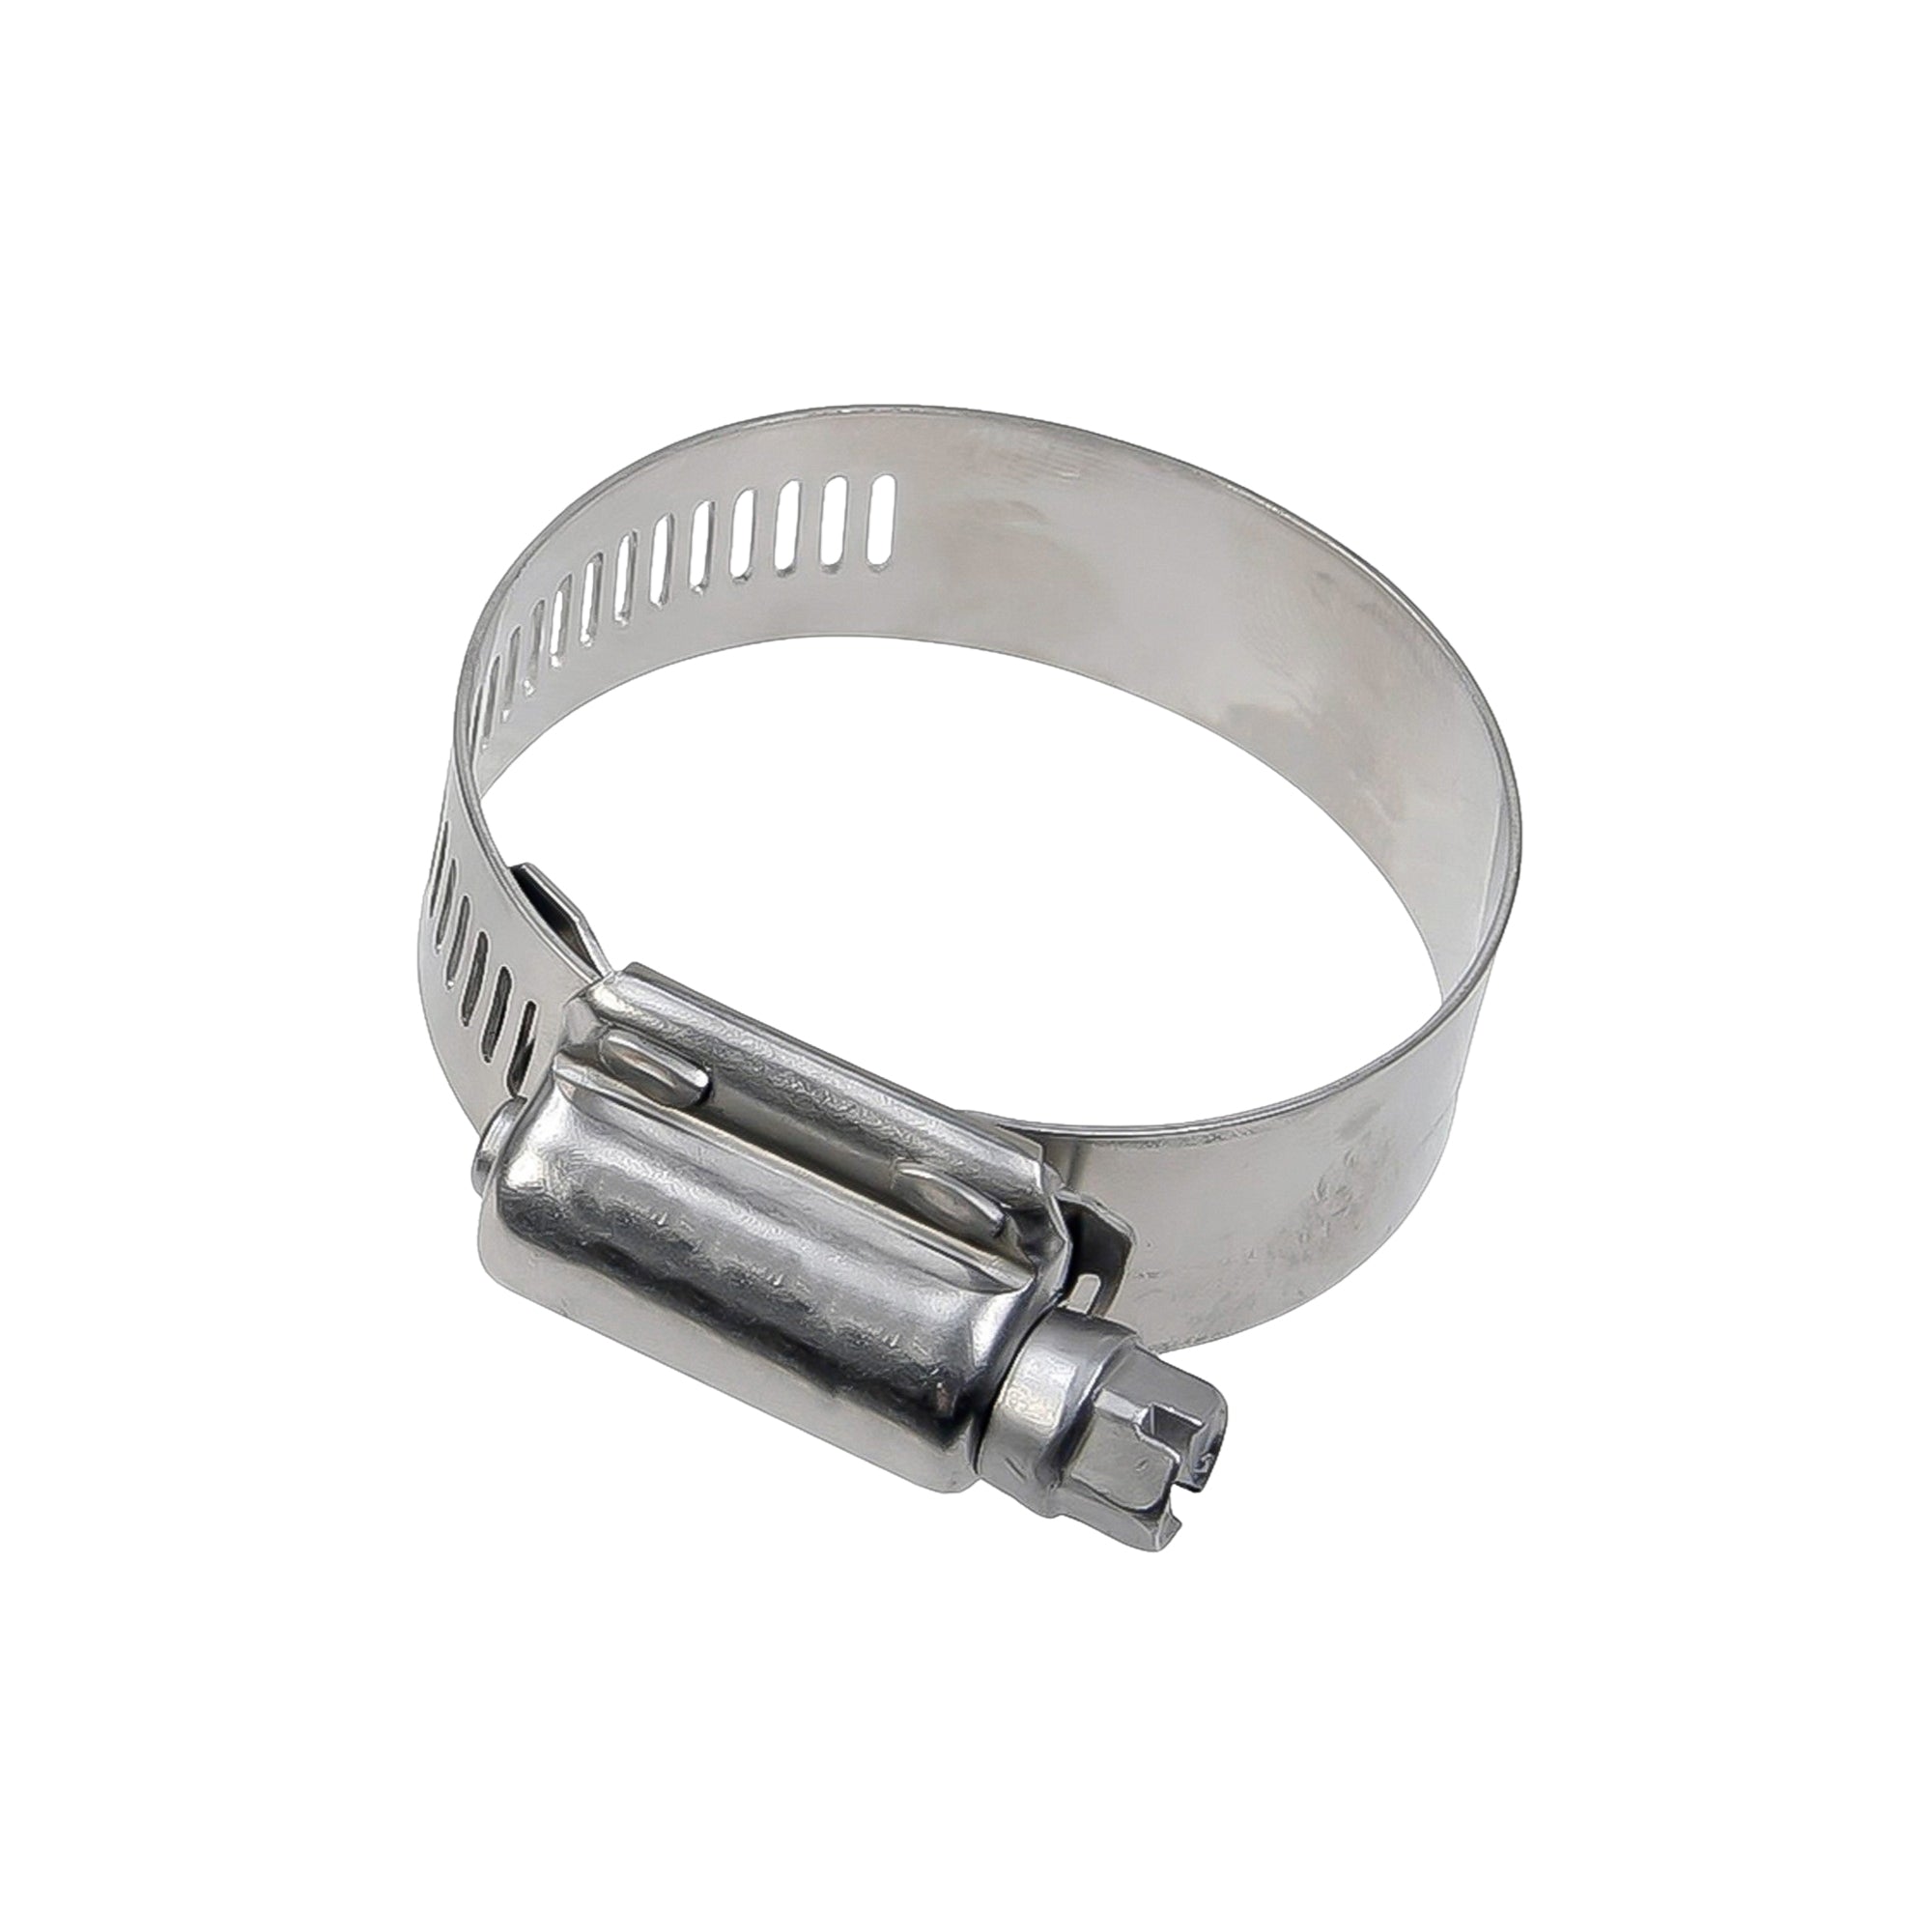 Hose Clamp 6 -12mm (1/4-Inch - 1/2-Inch), Stainless Steel - 10-Pack - FO2325-M10